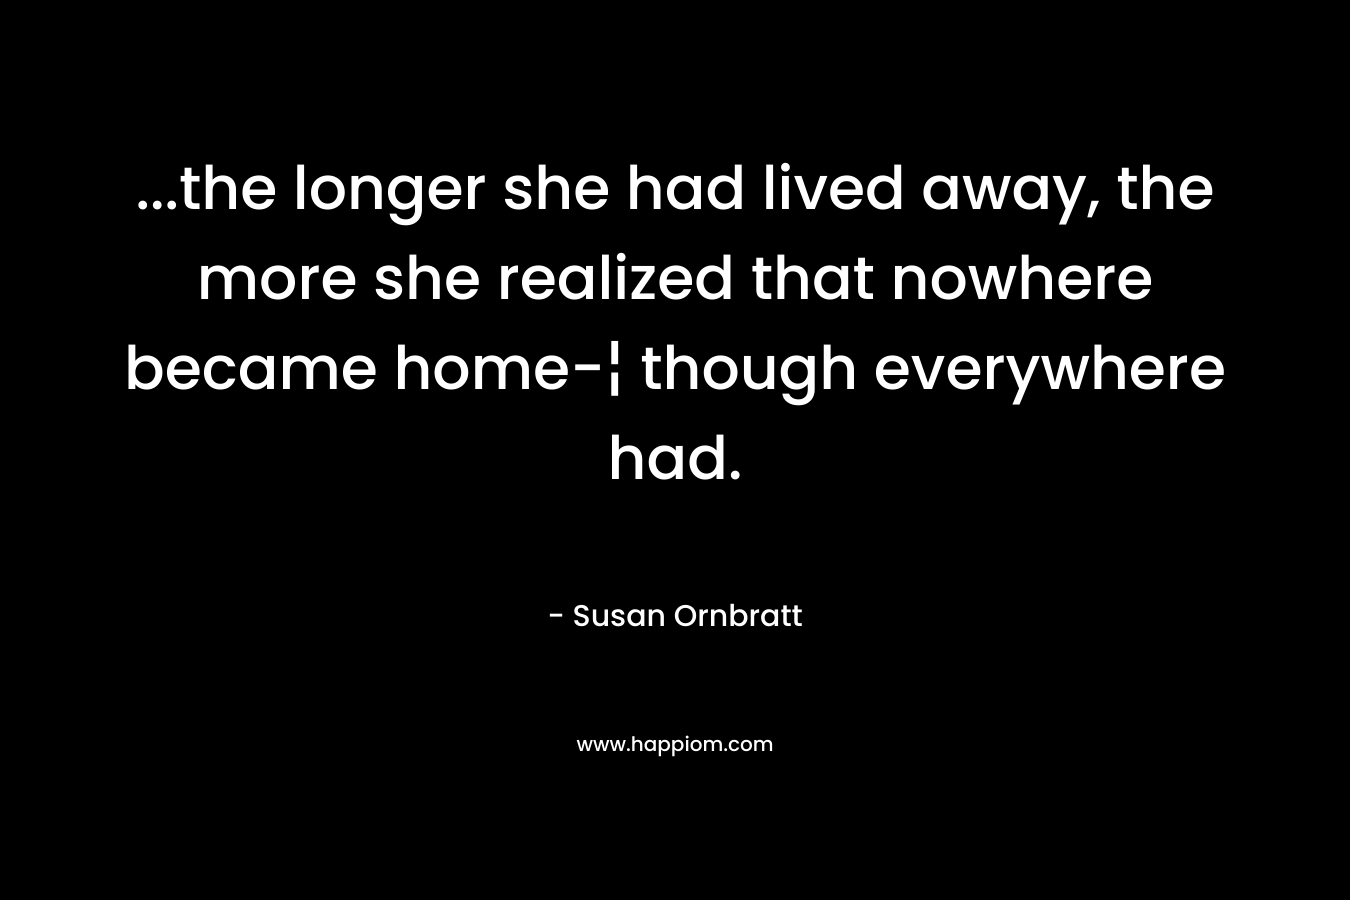 …the longer she had lived away, the more she realized that nowhere became home-¦ though everywhere had. – Susan Ornbratt